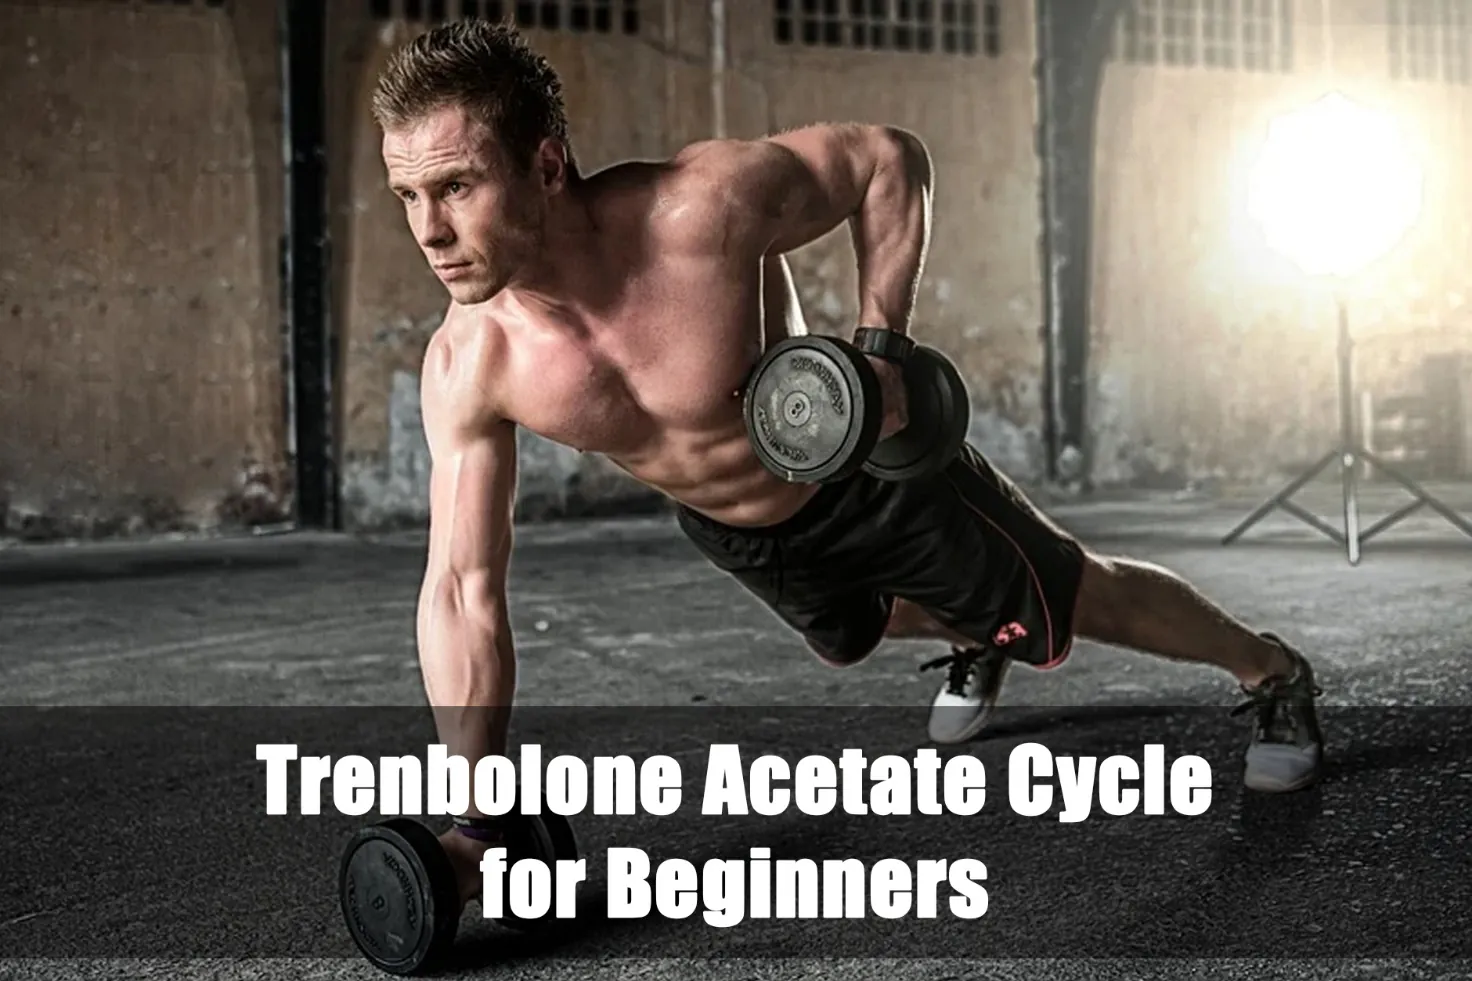 Trenbolone Acetate cycle for beginners